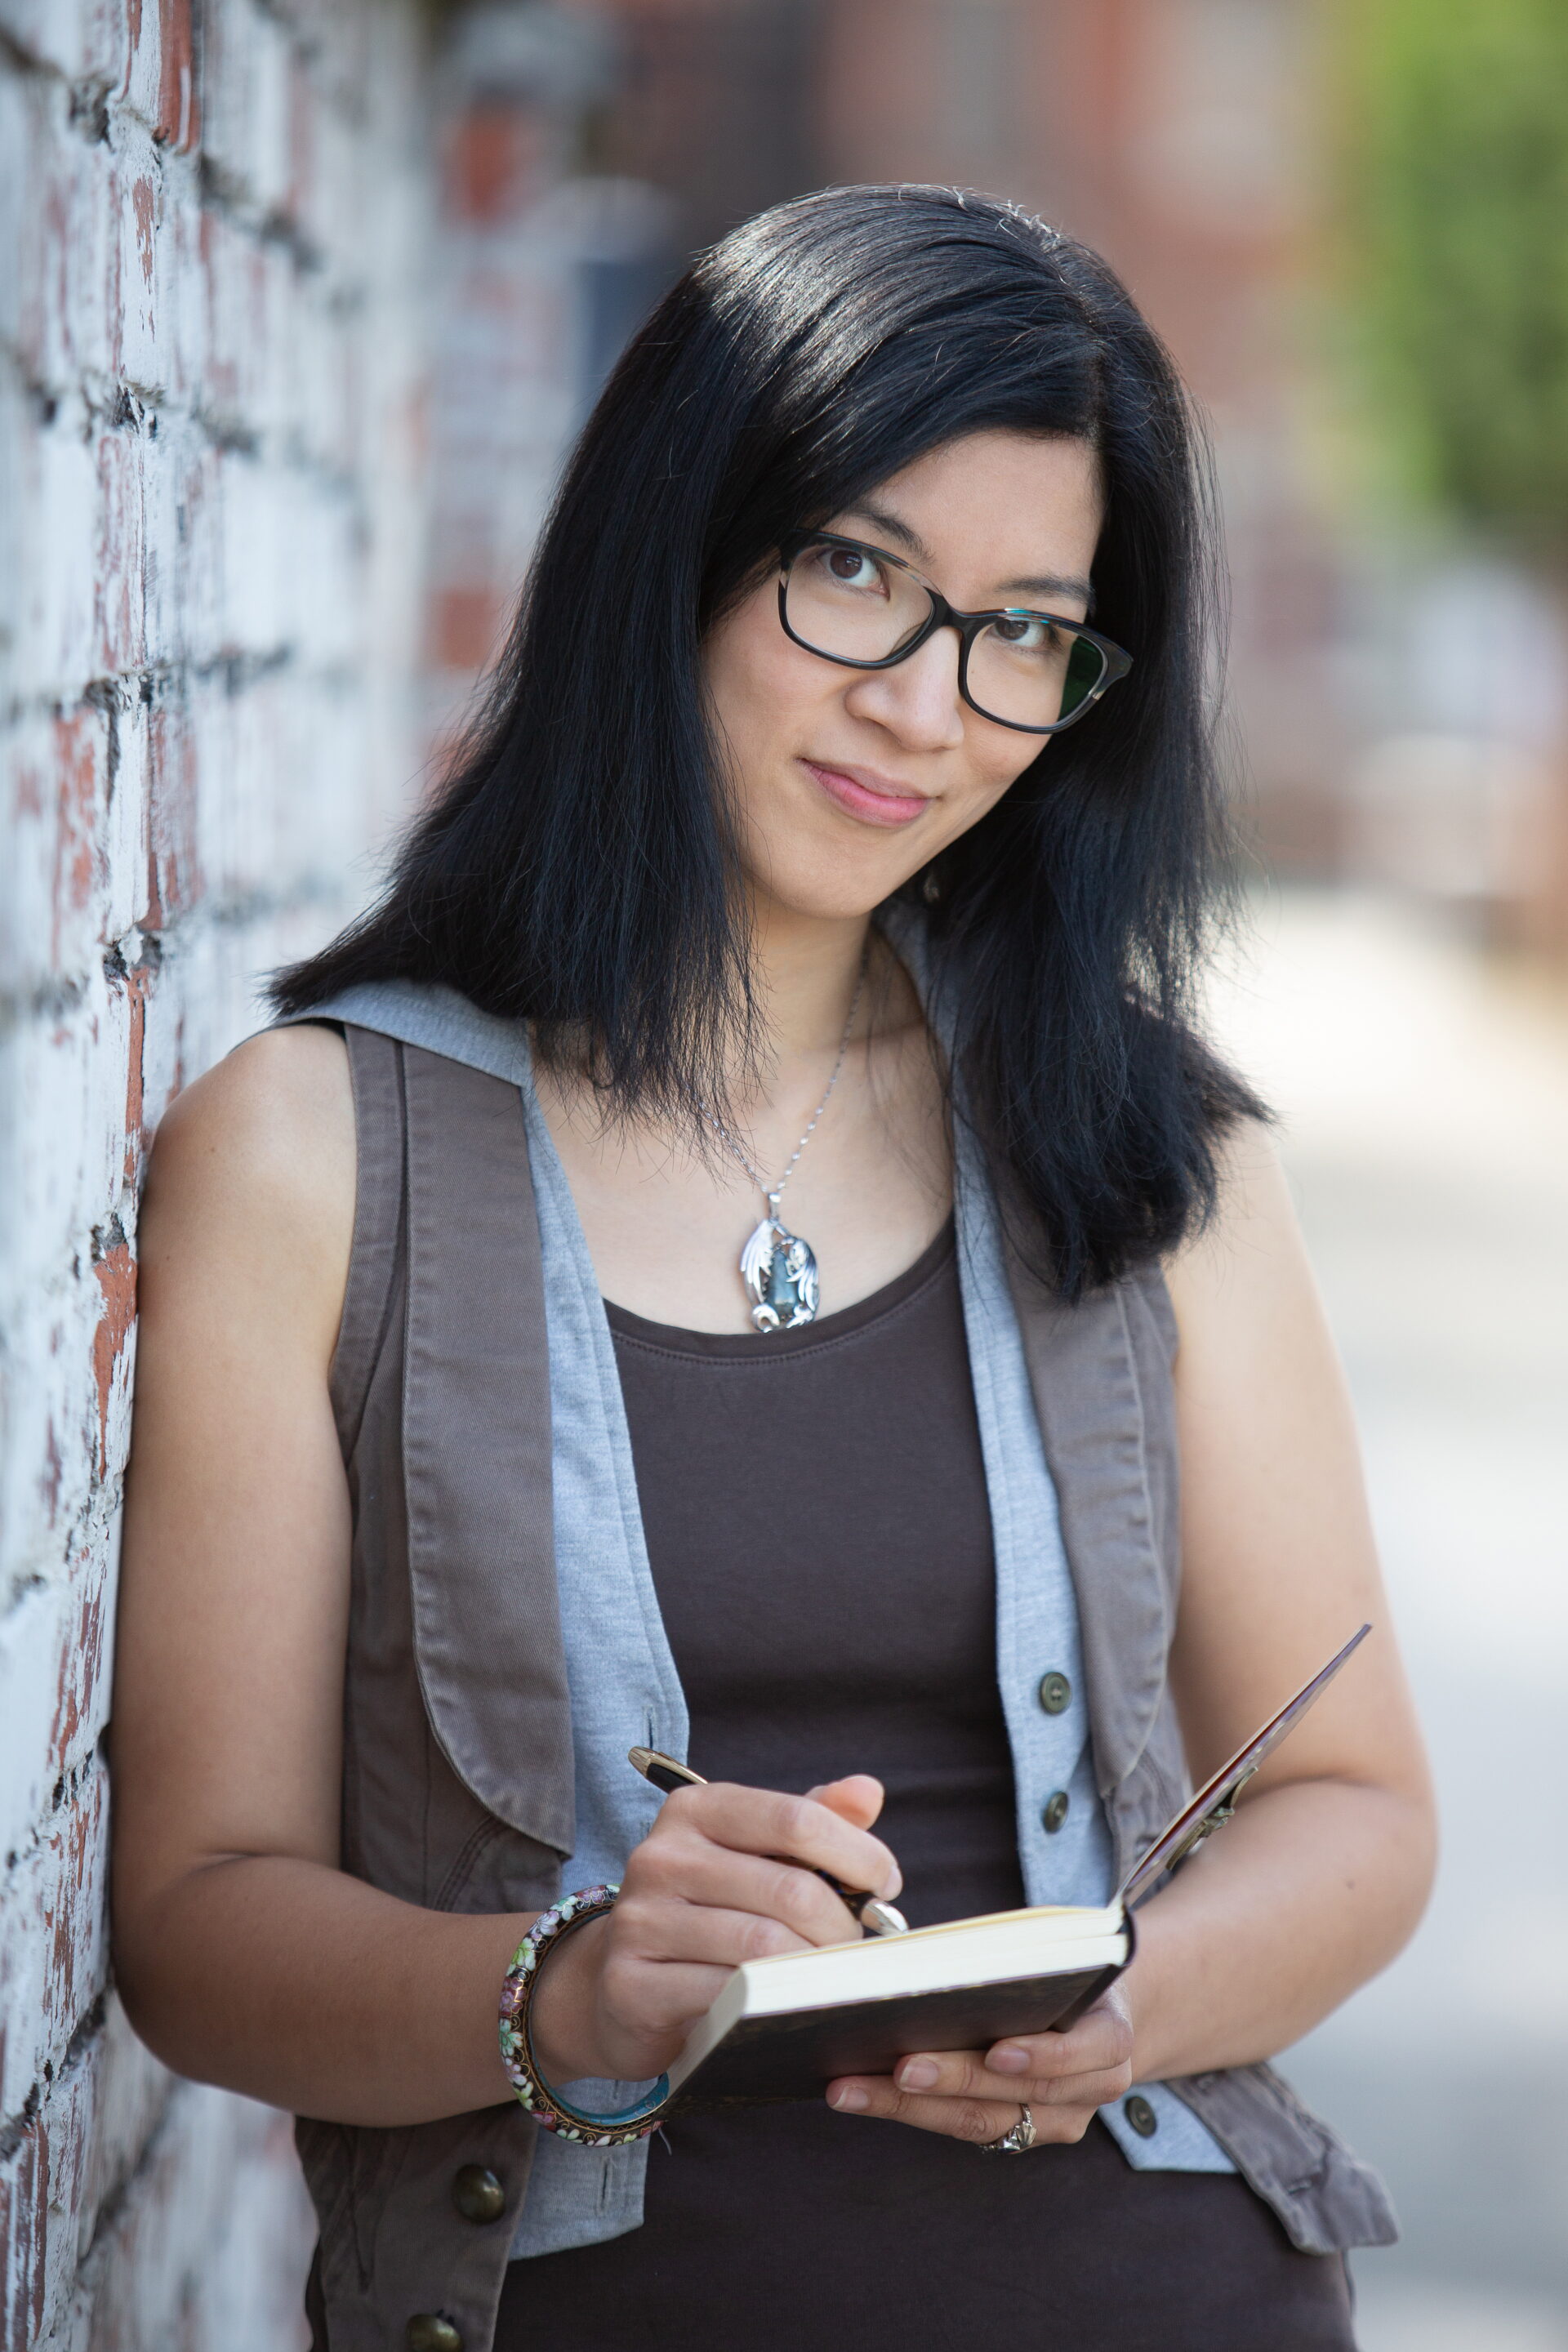 An author photo of Eliza Chan, she is holding a notebook and looking into the camera. Photo by Sandi Hodkinson